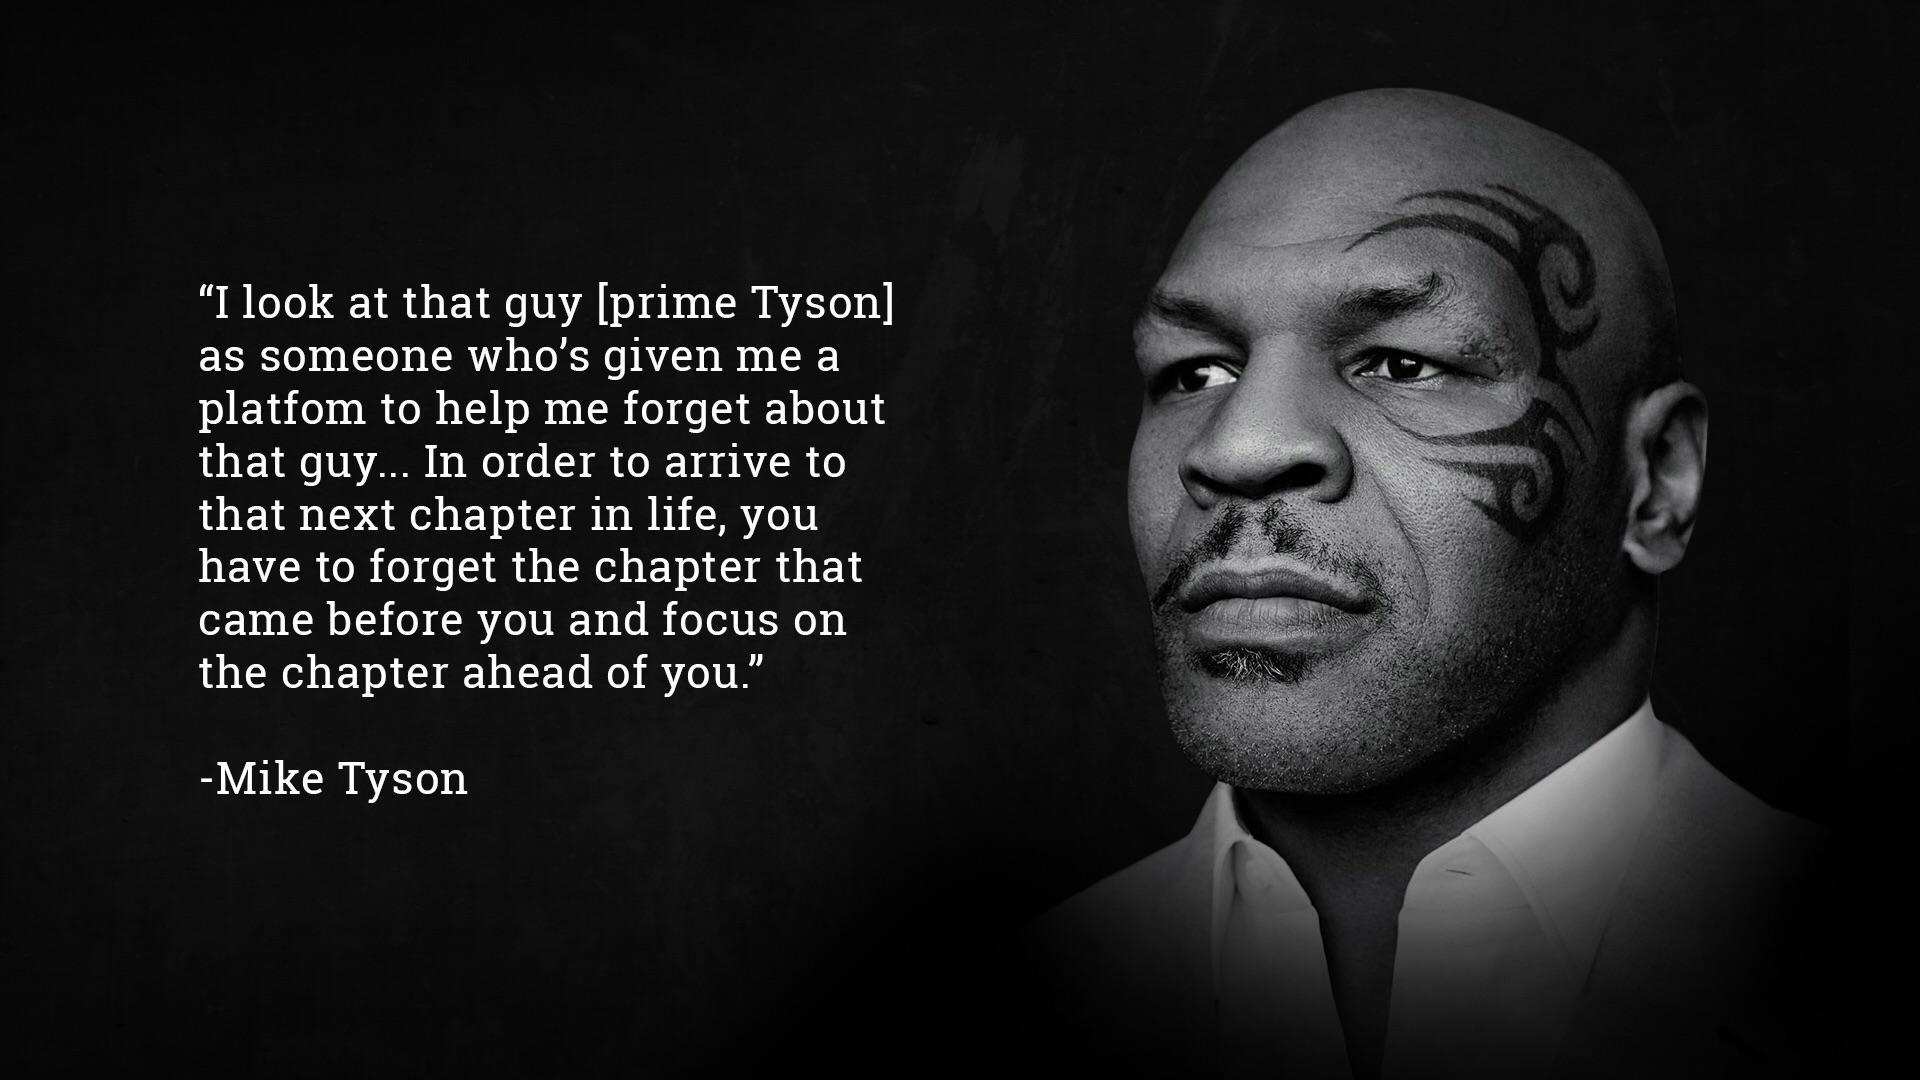 Mike Tyson Quotes Wallpapers - Top Free Mike Tyson Quotes Backgrounds